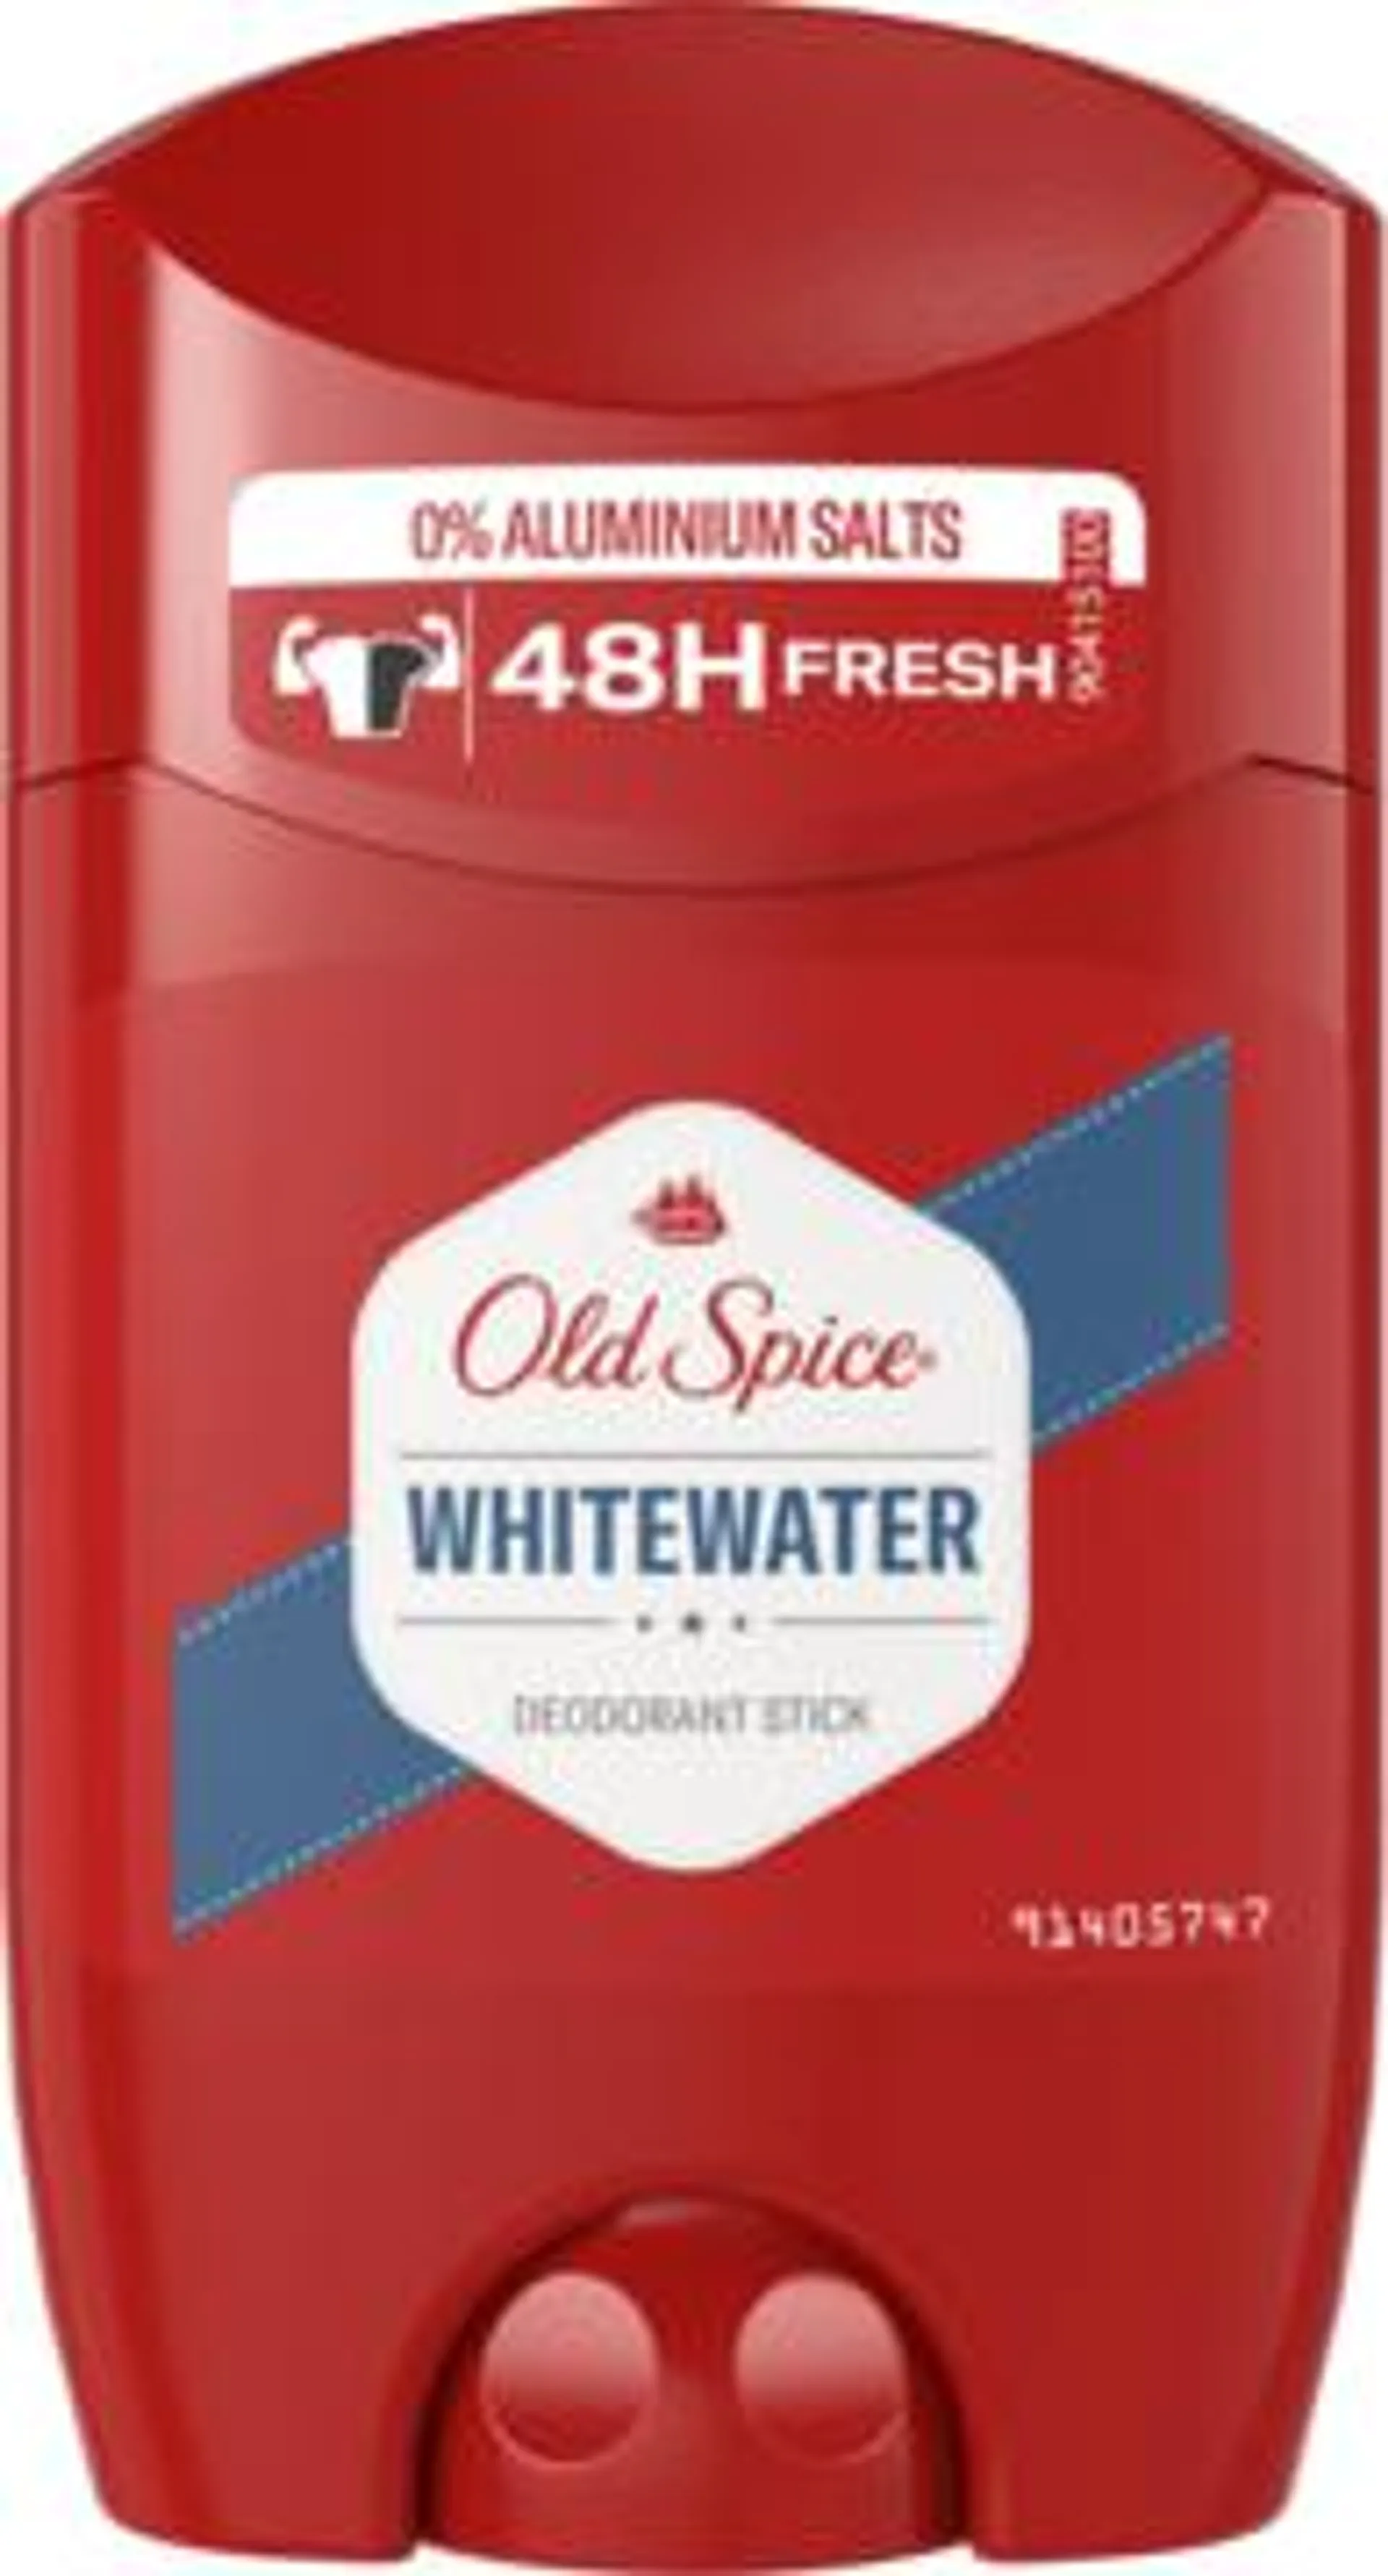 OLD SPICE Whitewater